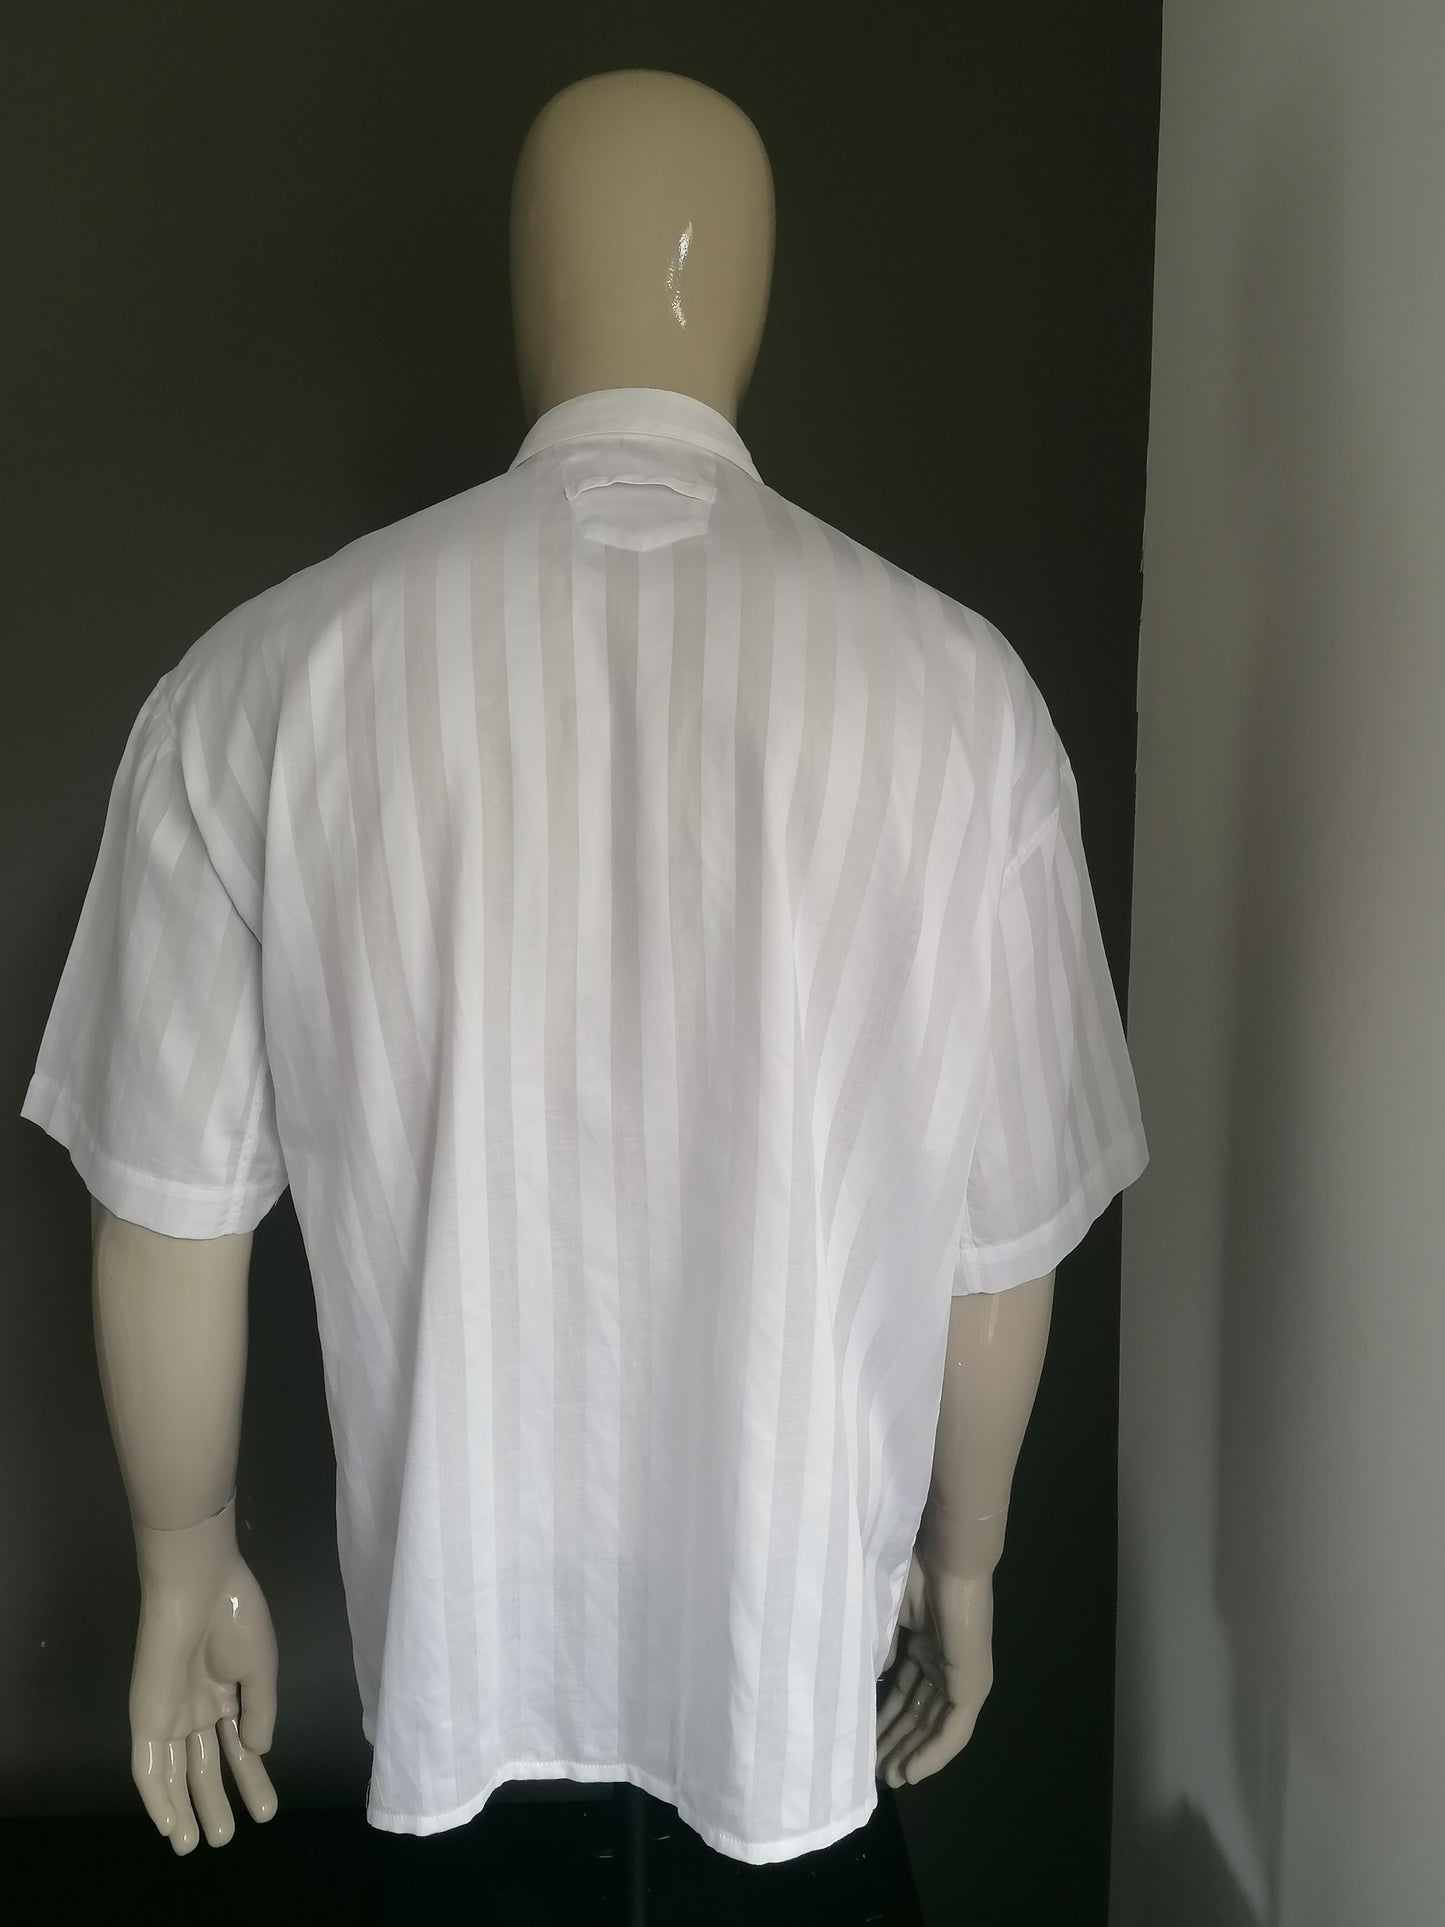 Vintage Signum shirt short sleeve and larger buttons. White striped motif. Size XL.